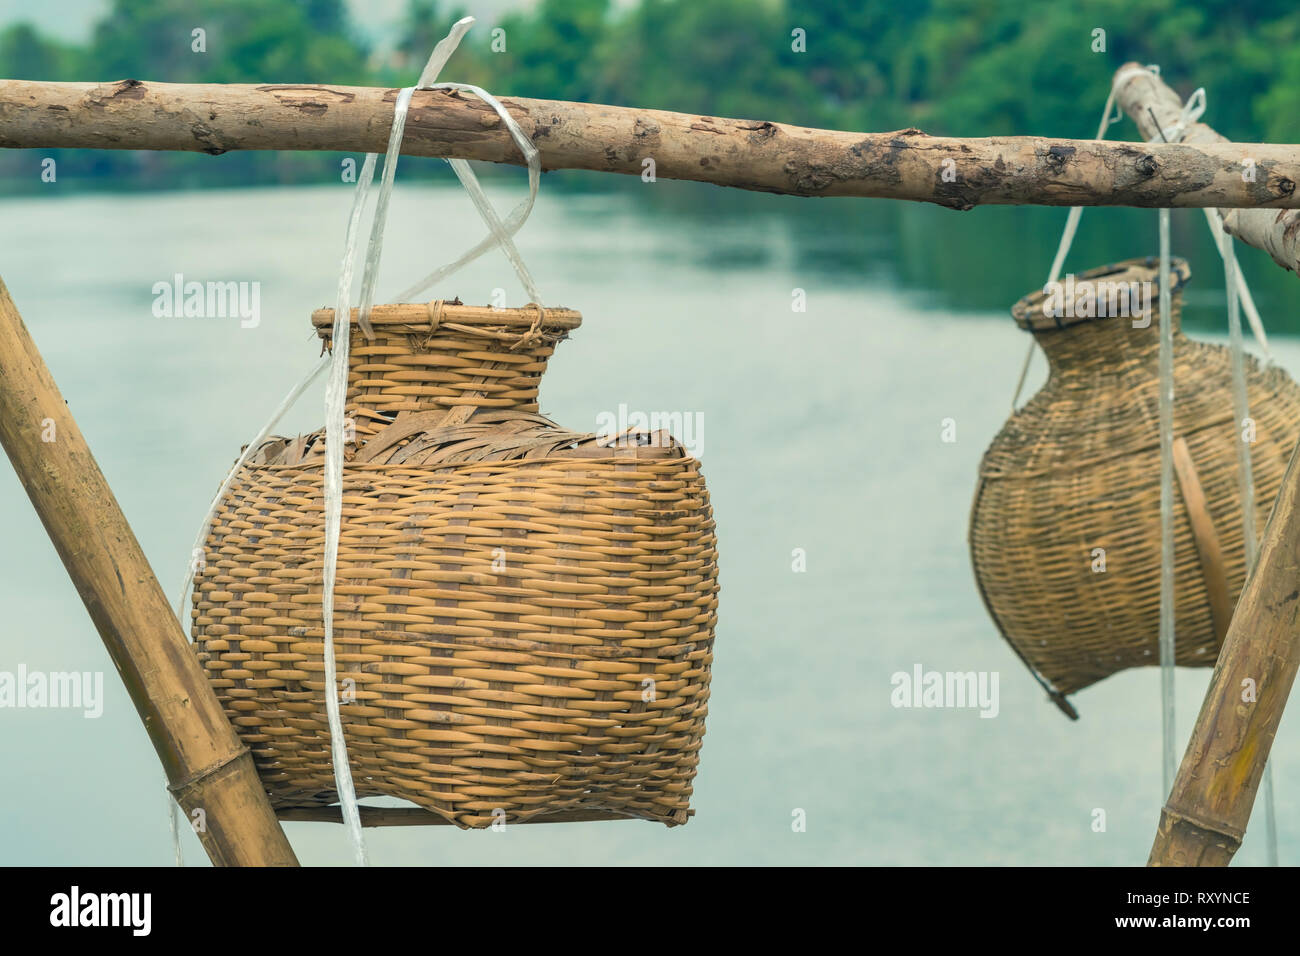 Bamboo Basket For Fish Trap In Asia Stock Photo, Picture and Royalty Free  Image. Image 26484332.